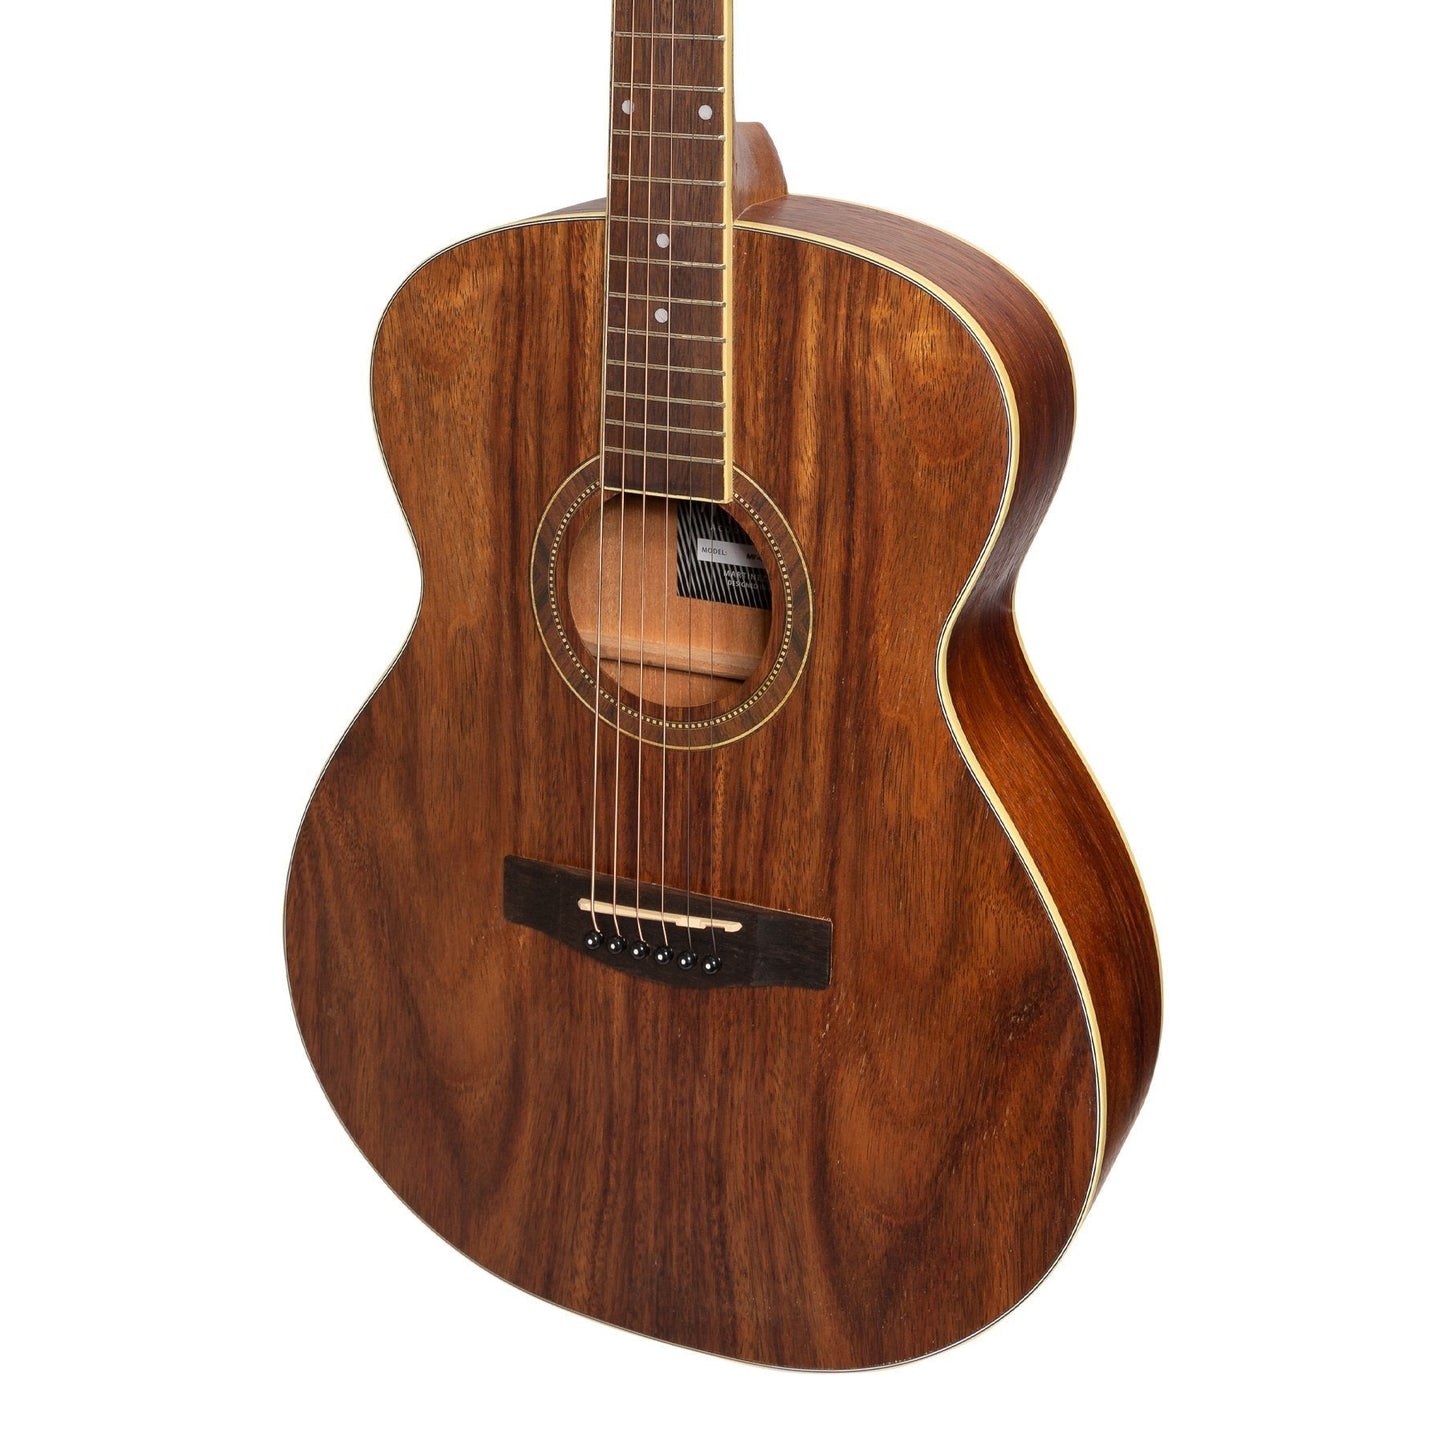 Martinez '41 Series' Folk Size Acoustic Guitar with Built-in Tuner (Rosewood)